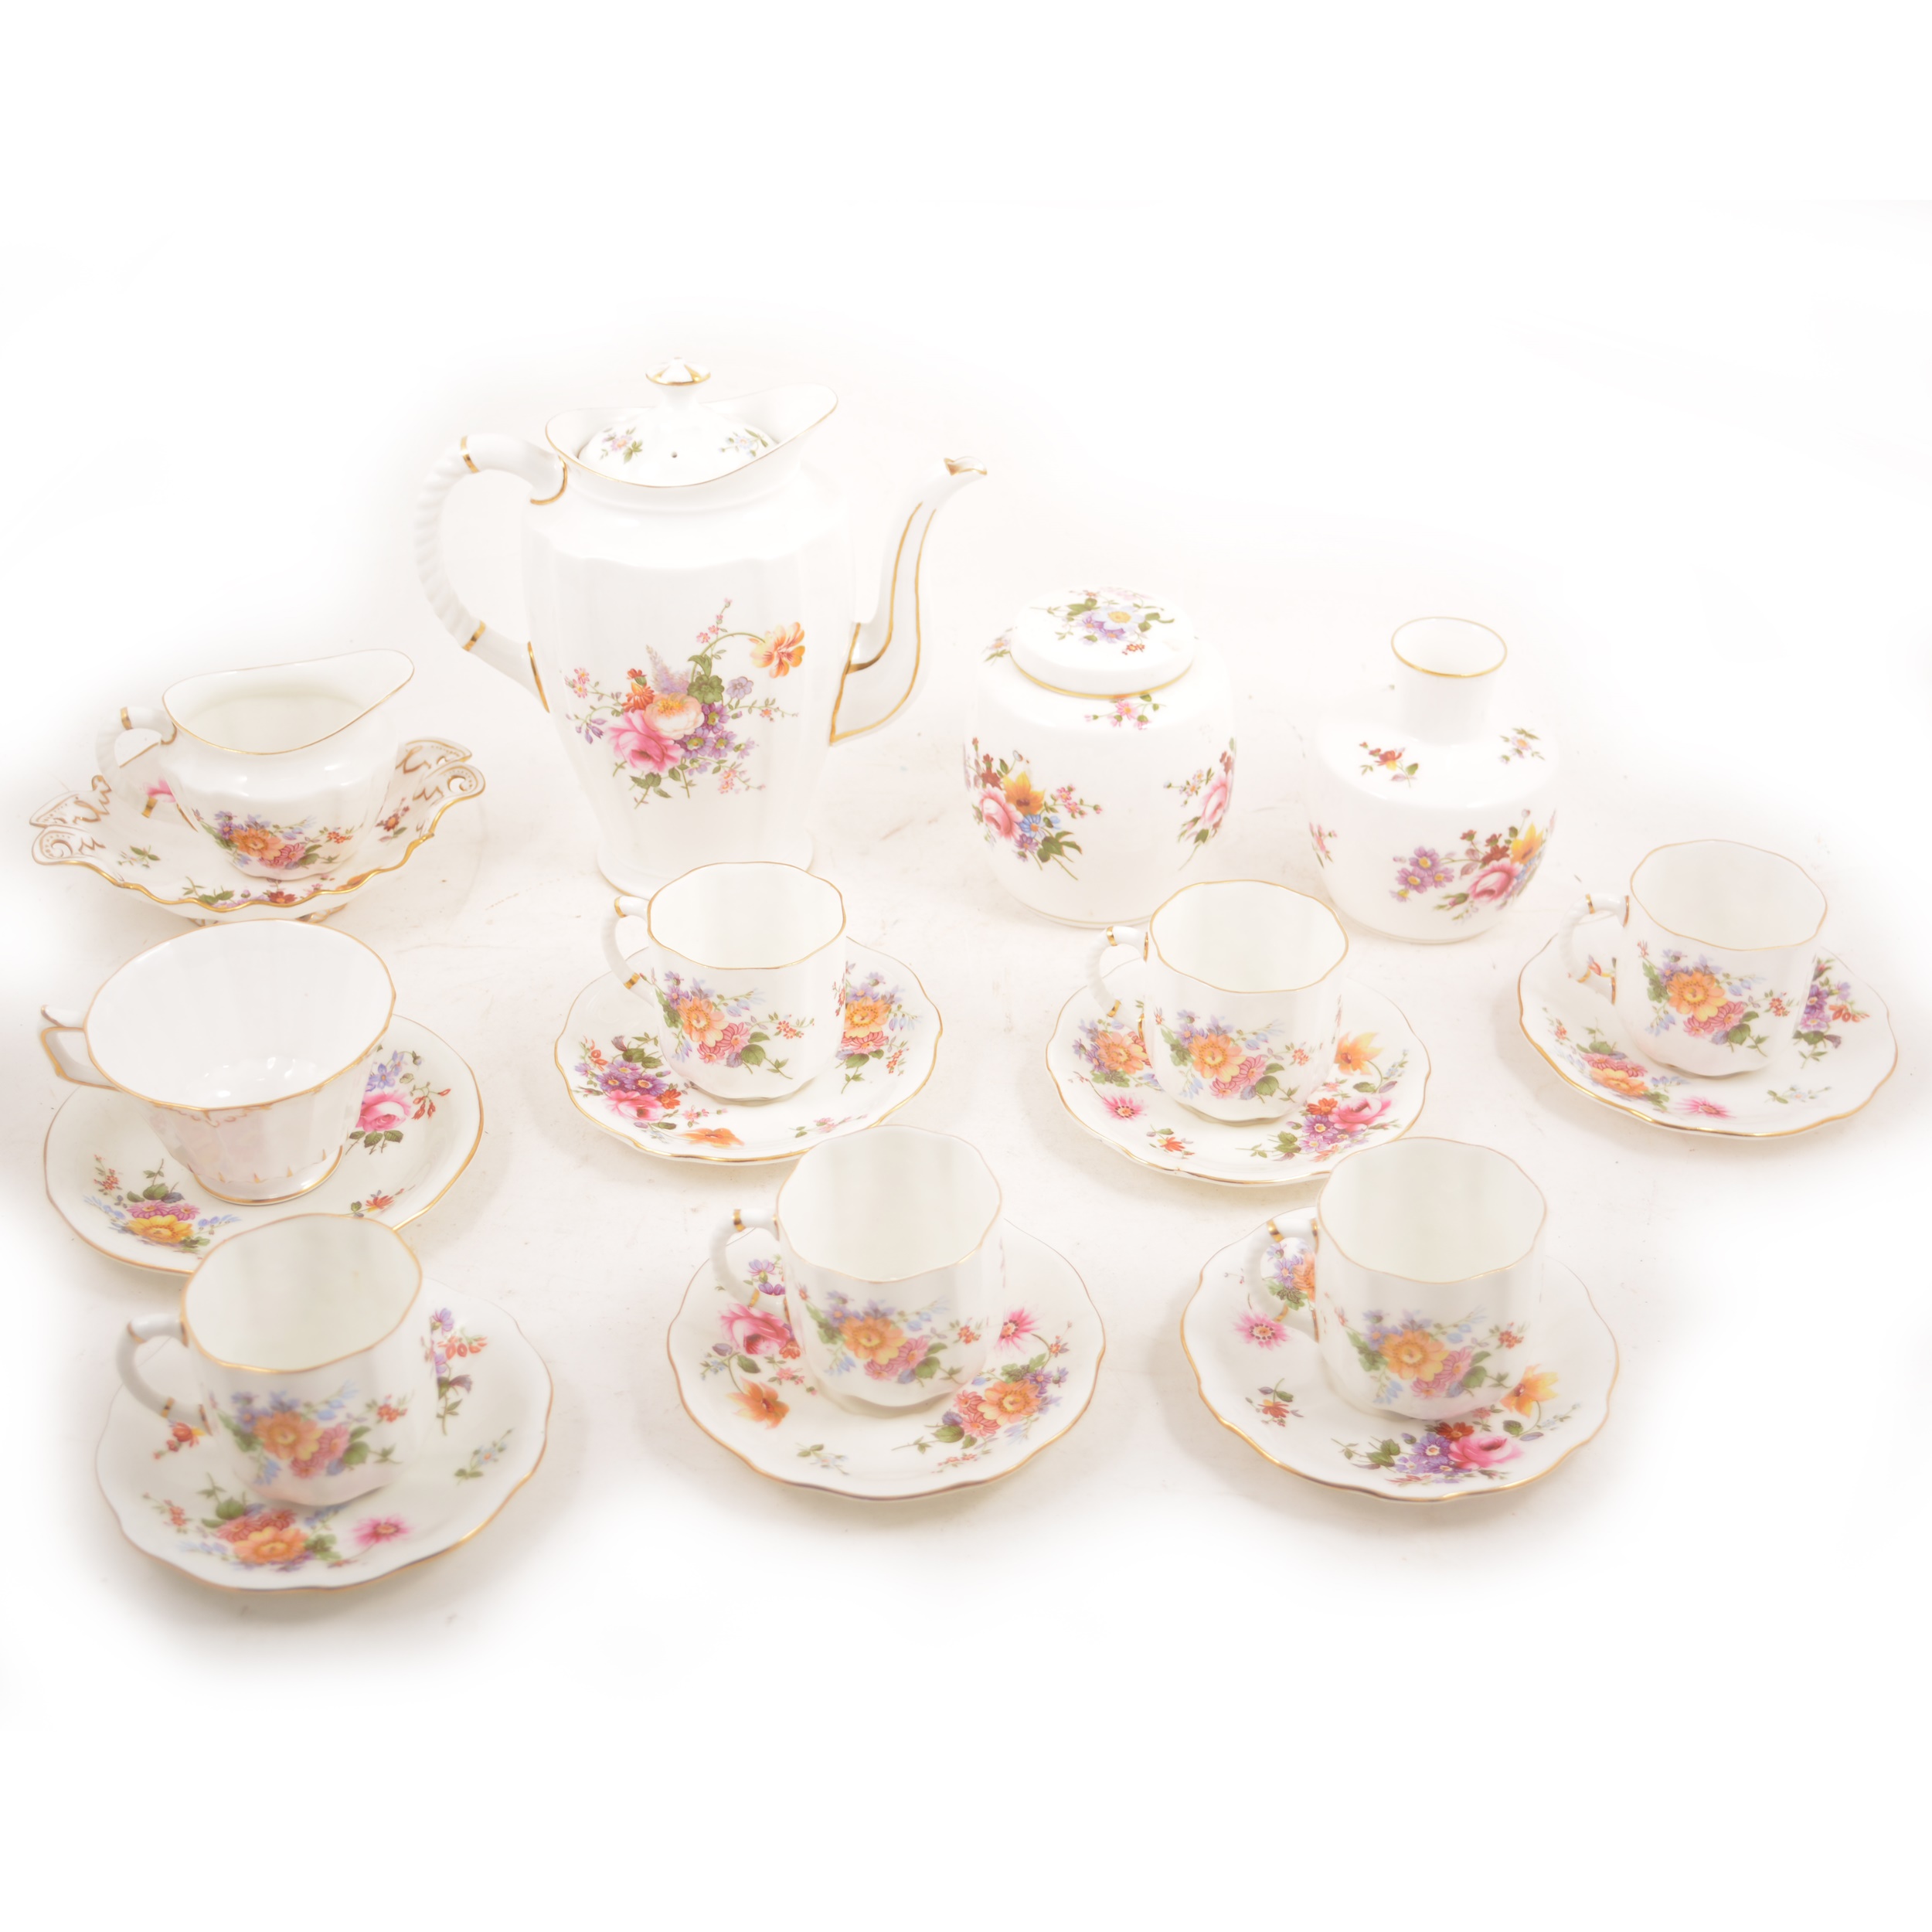 Royal Crown Derby - A "Posies" coffee set and related wares.